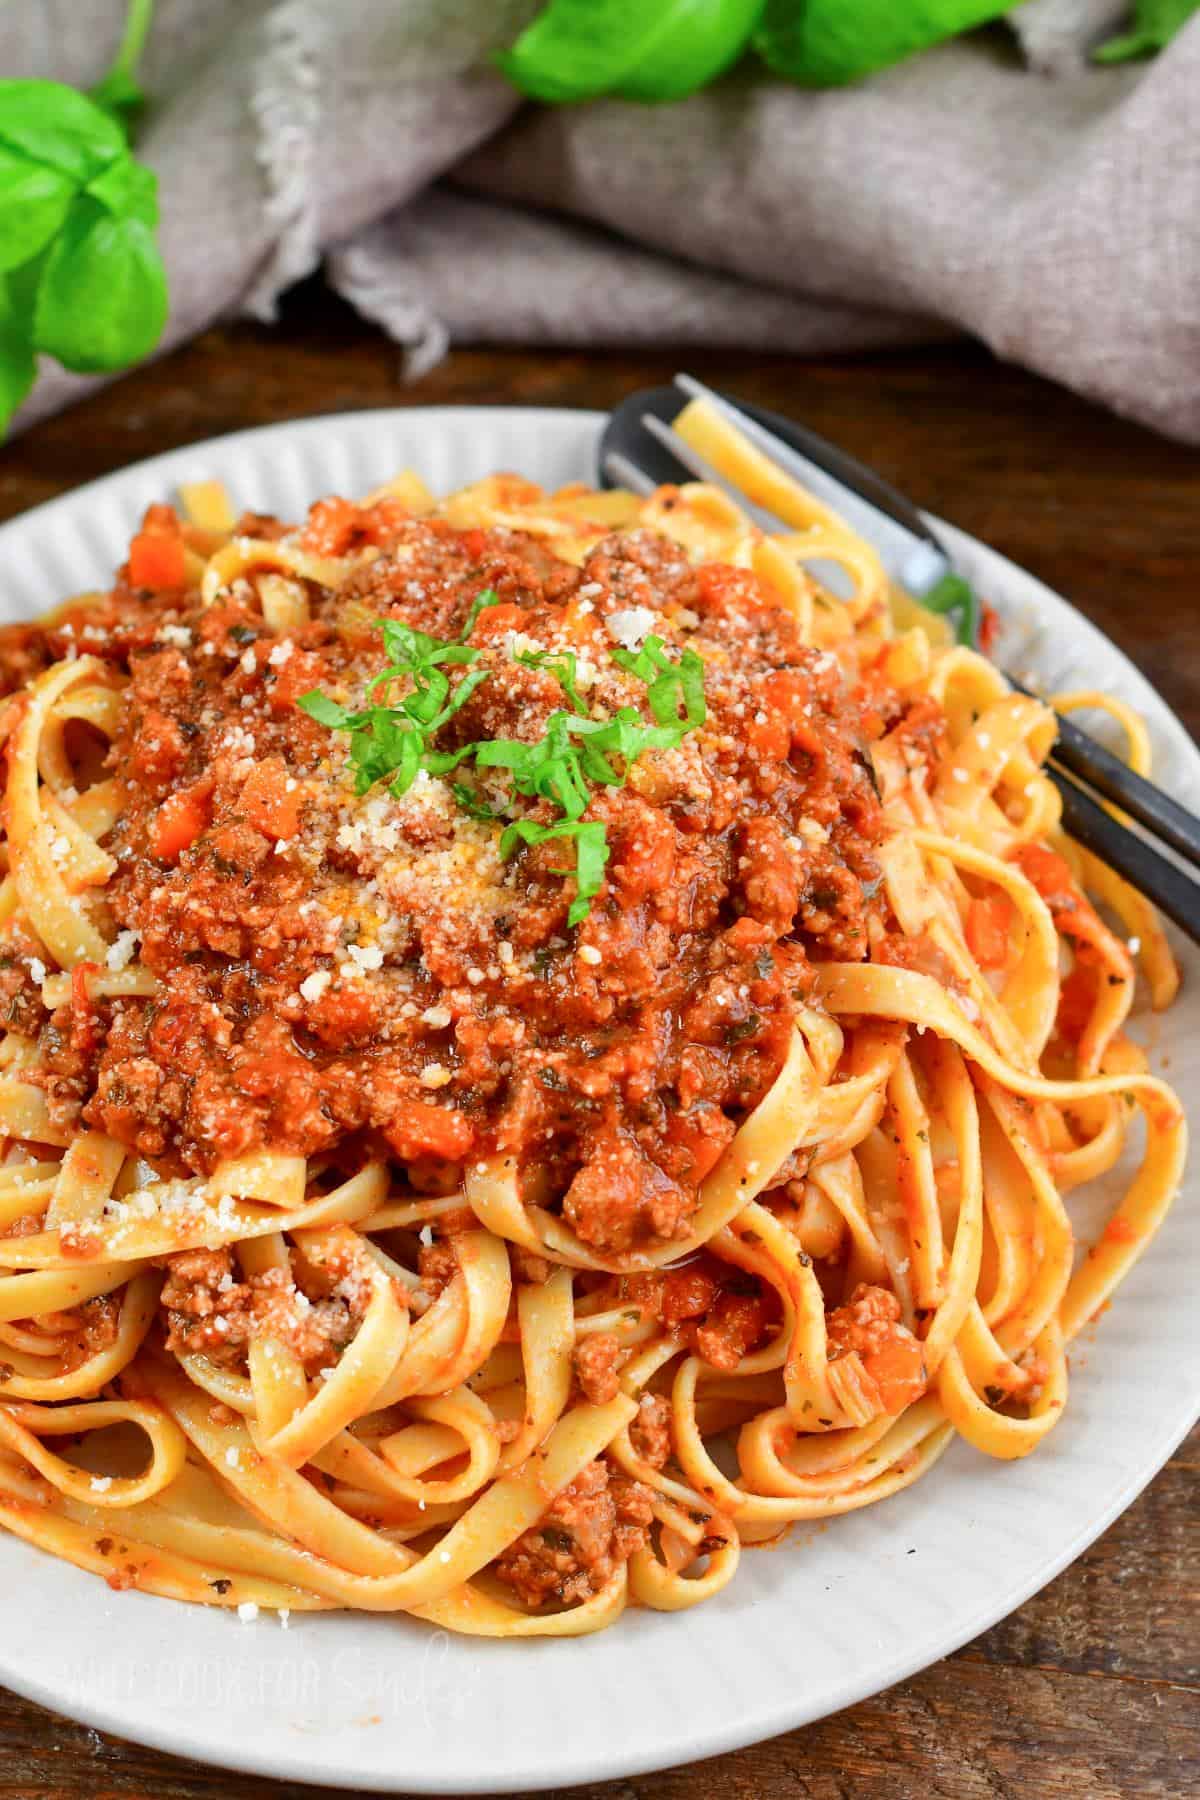 Fettuccine mixed and topped with Bolognese sauce on a plate with a fork.